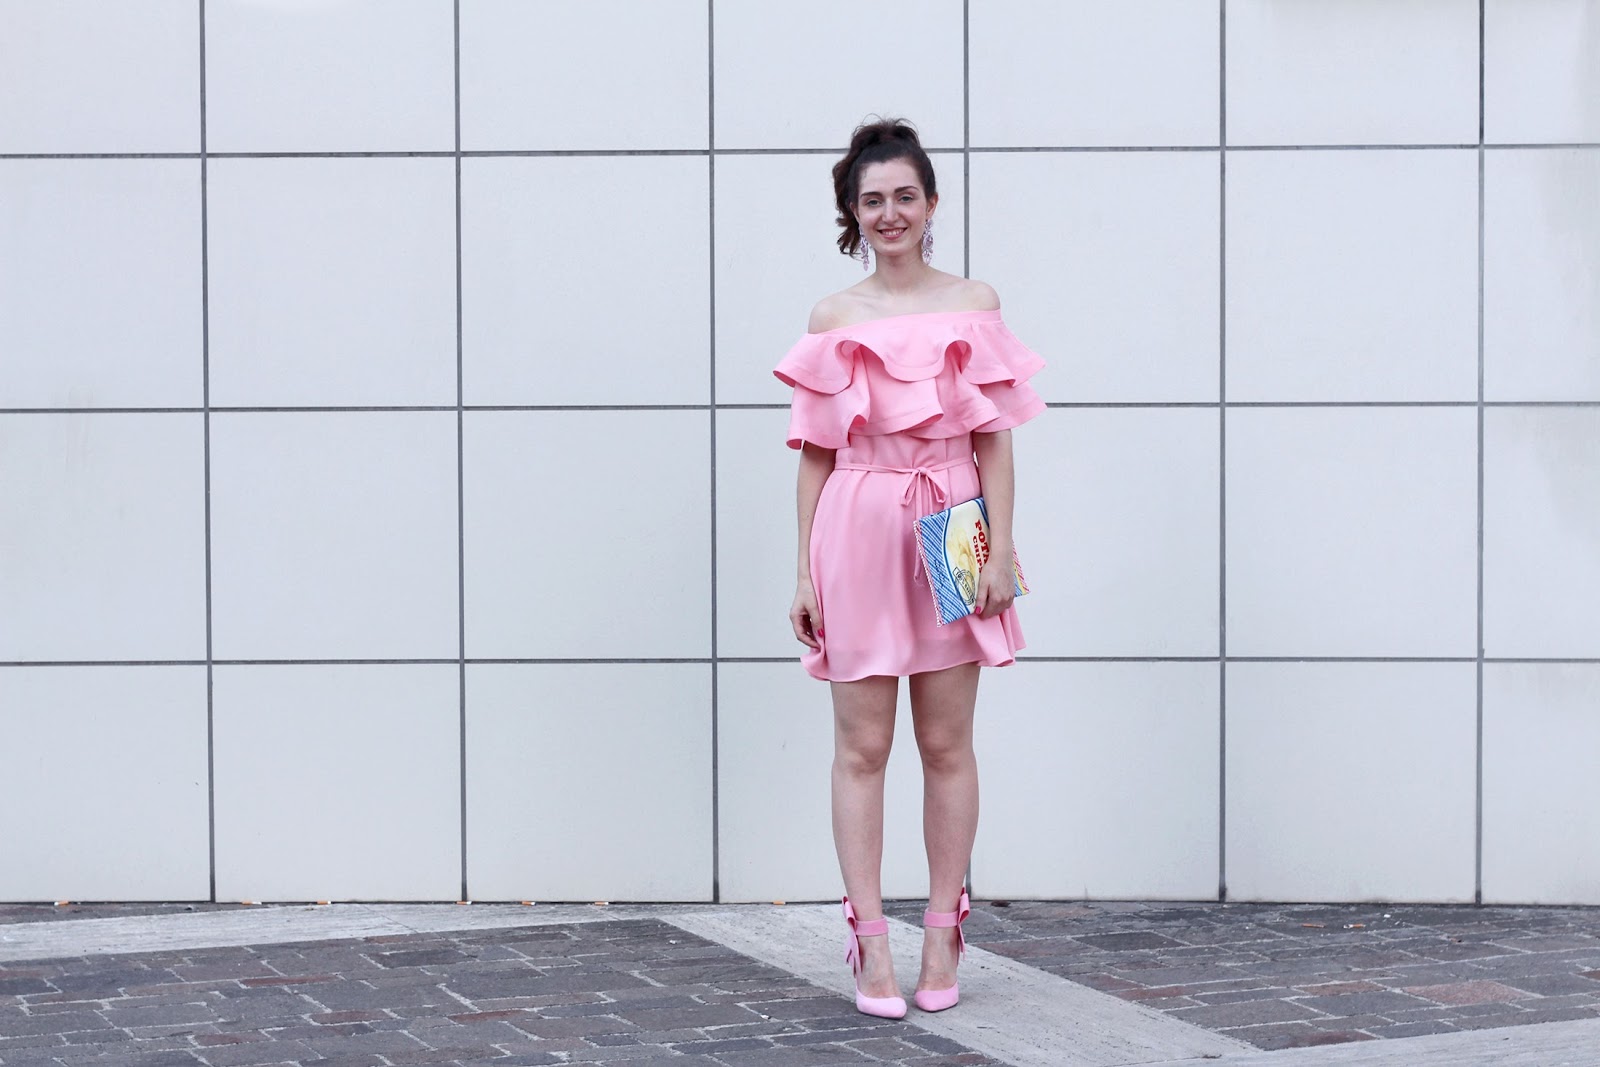 fashion style blogger outfit ootd italian girl italy trend vogue glamour pescara pink volant ruffles ruches off-shoulder dress top chicwish dress link bow heels shoes décolleté axels laboratory soutache earring orecchini zara patatine potatos bag clutch pop